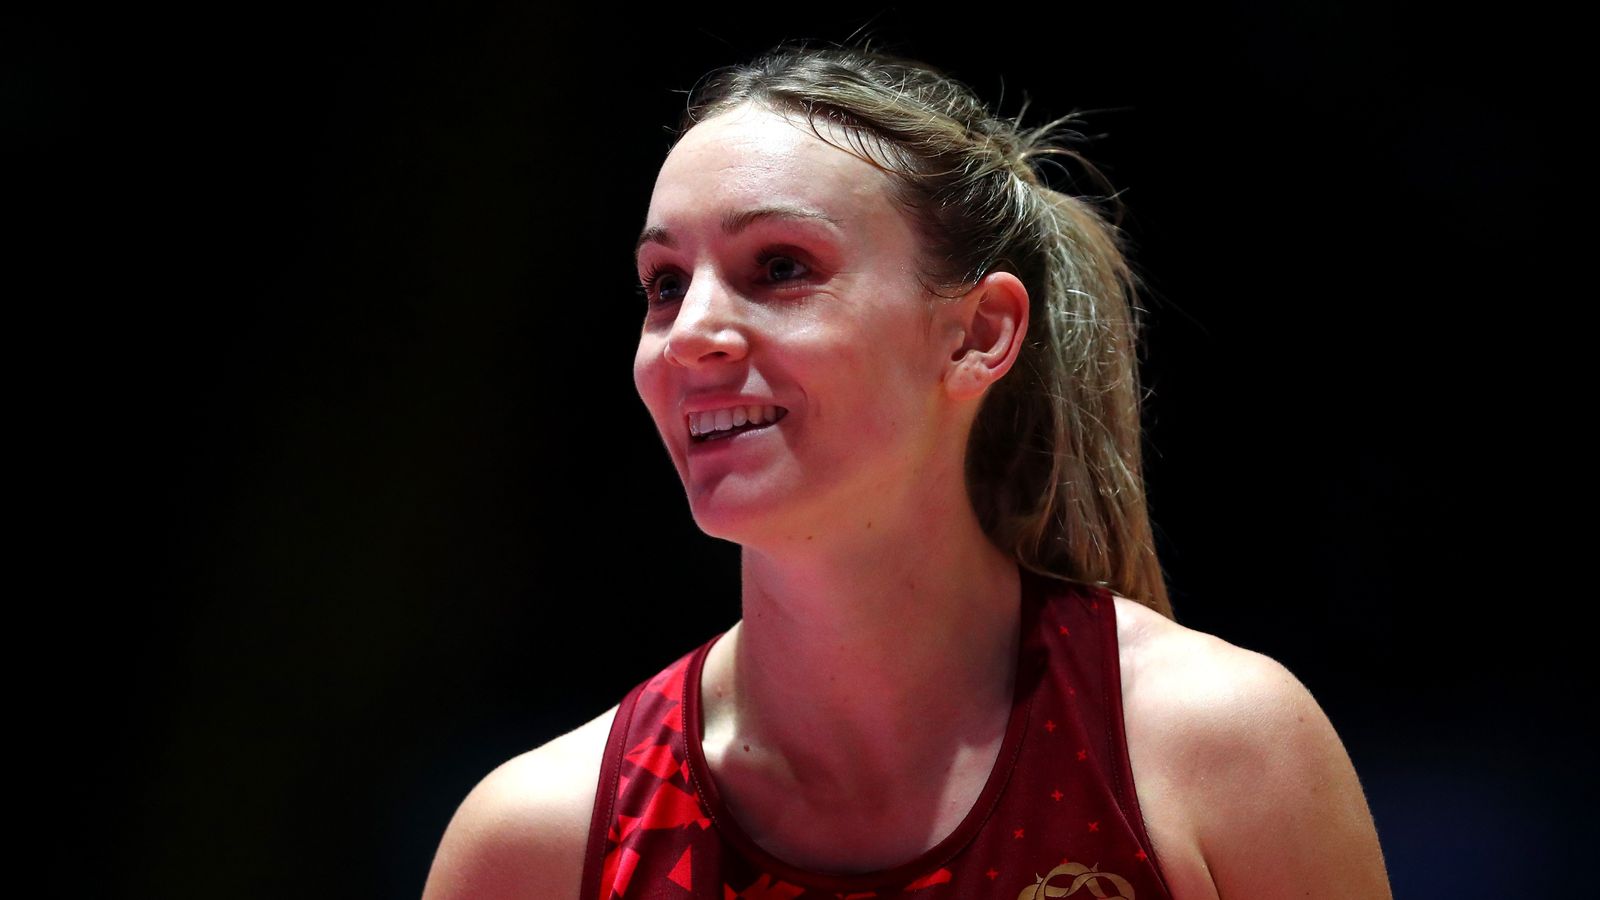 Nat Metcalf to lead England’s title defence at Commonwealth Games Netball in Birmingham